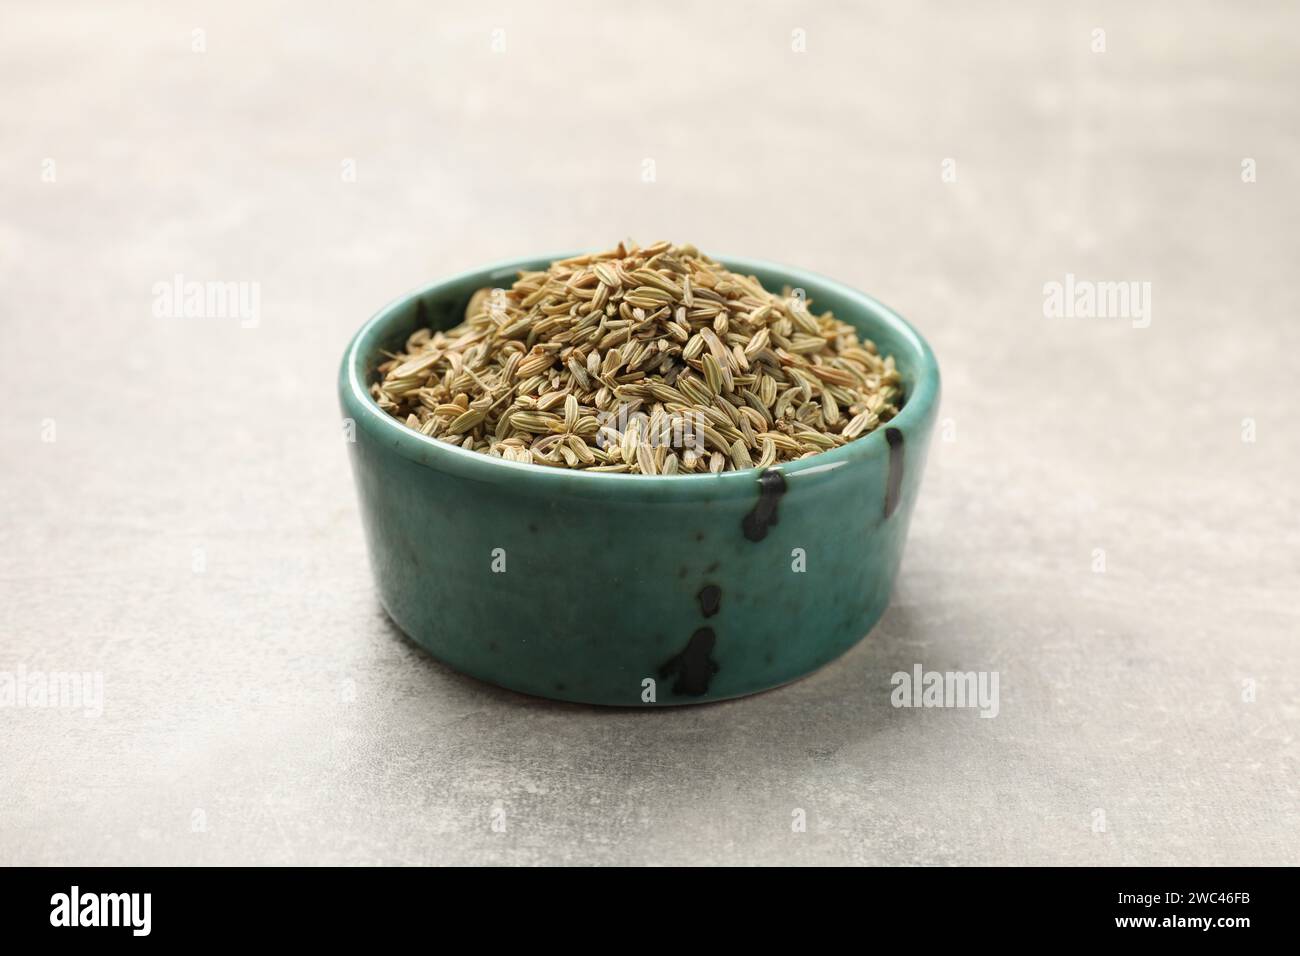 Fennel seeds in bowl on grey table Stock Photo